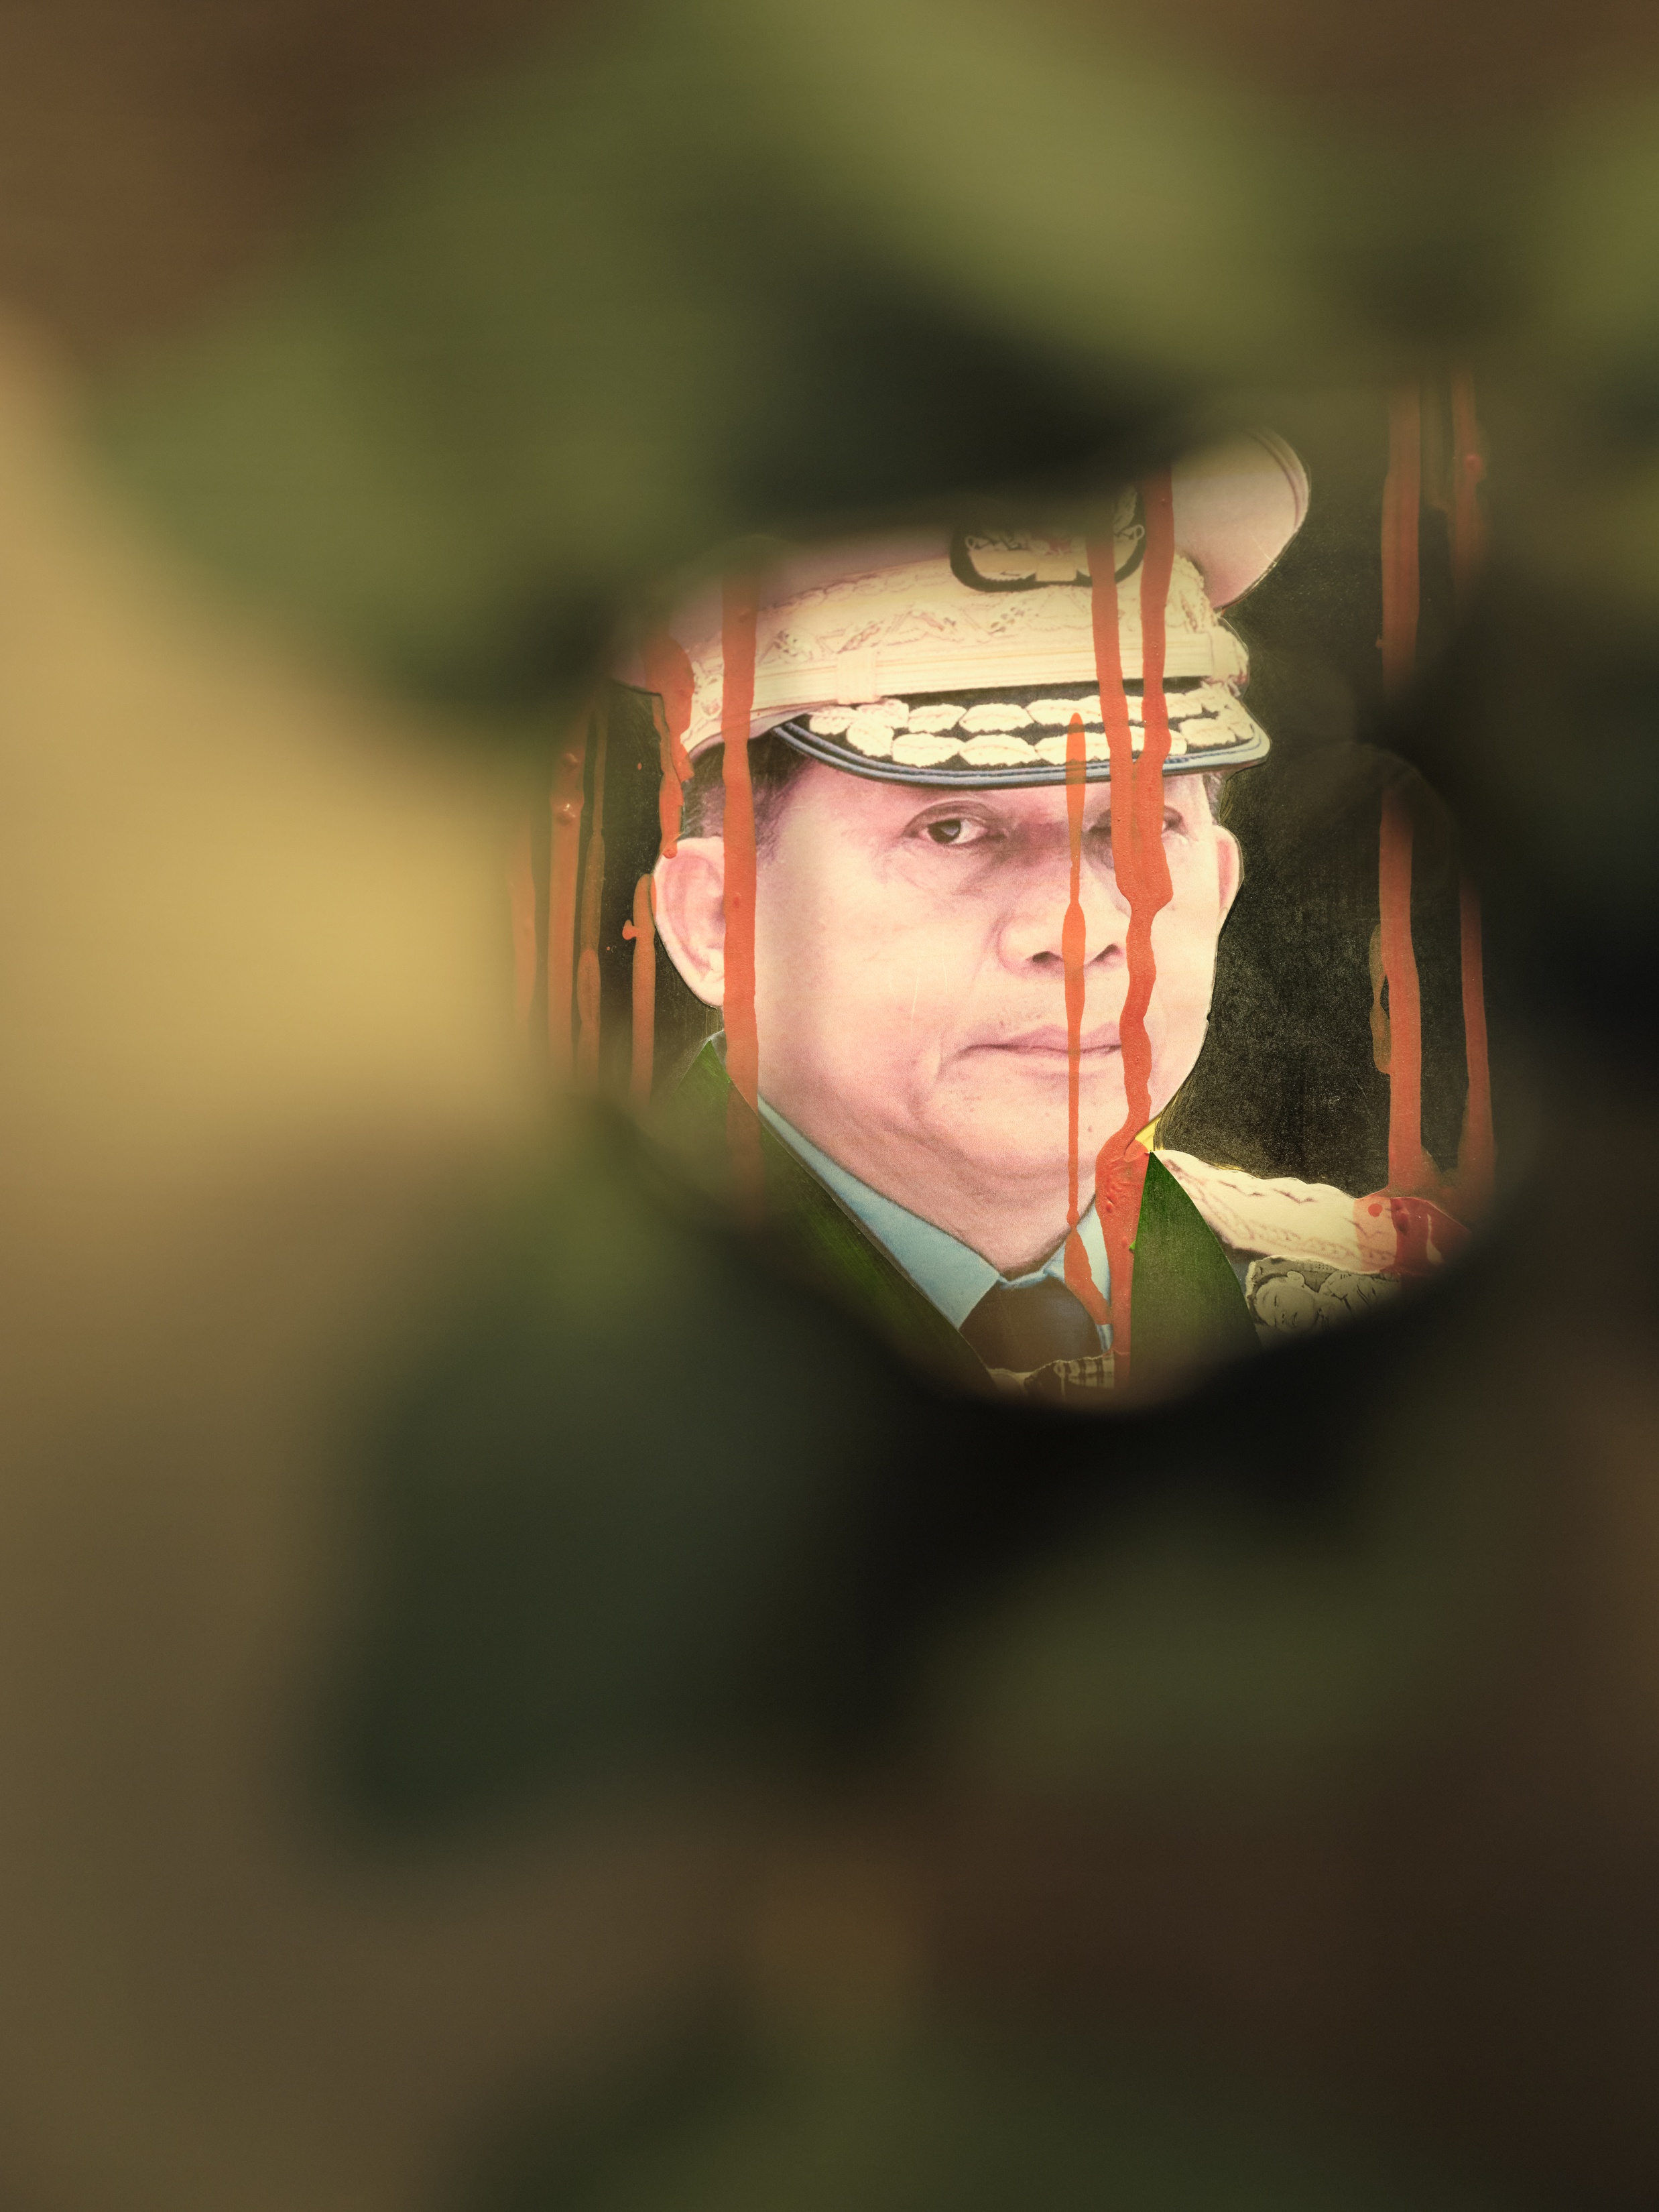 Peephole view of a military figure